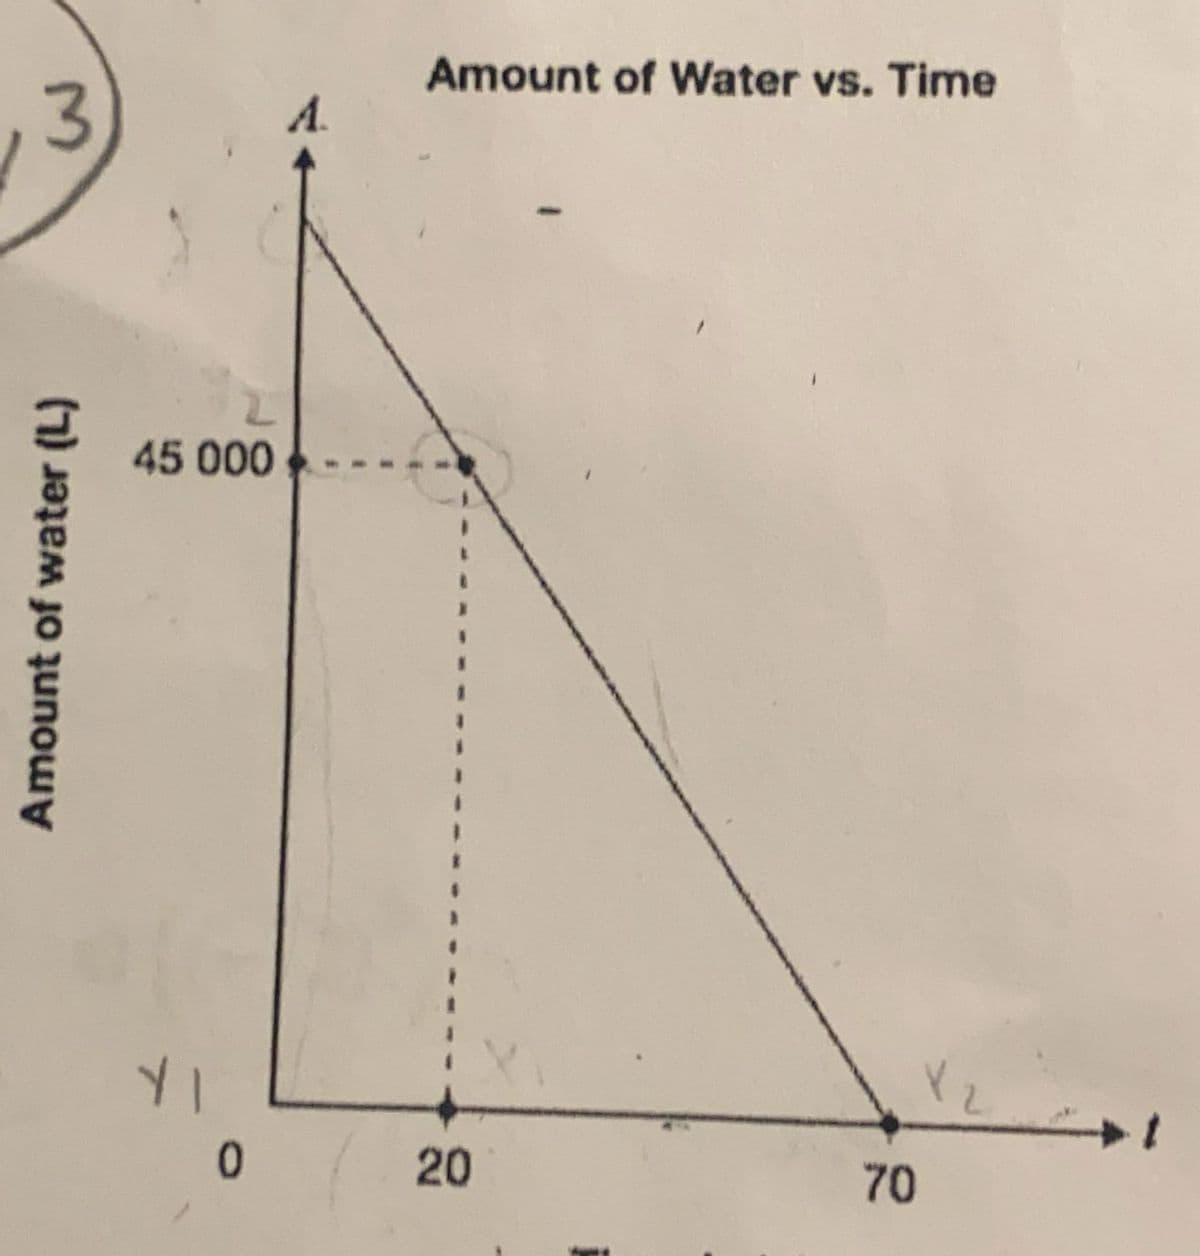 Amount of water (L)
3
A.
Amount of Water vs. Time
45 000
YI
0
20
70